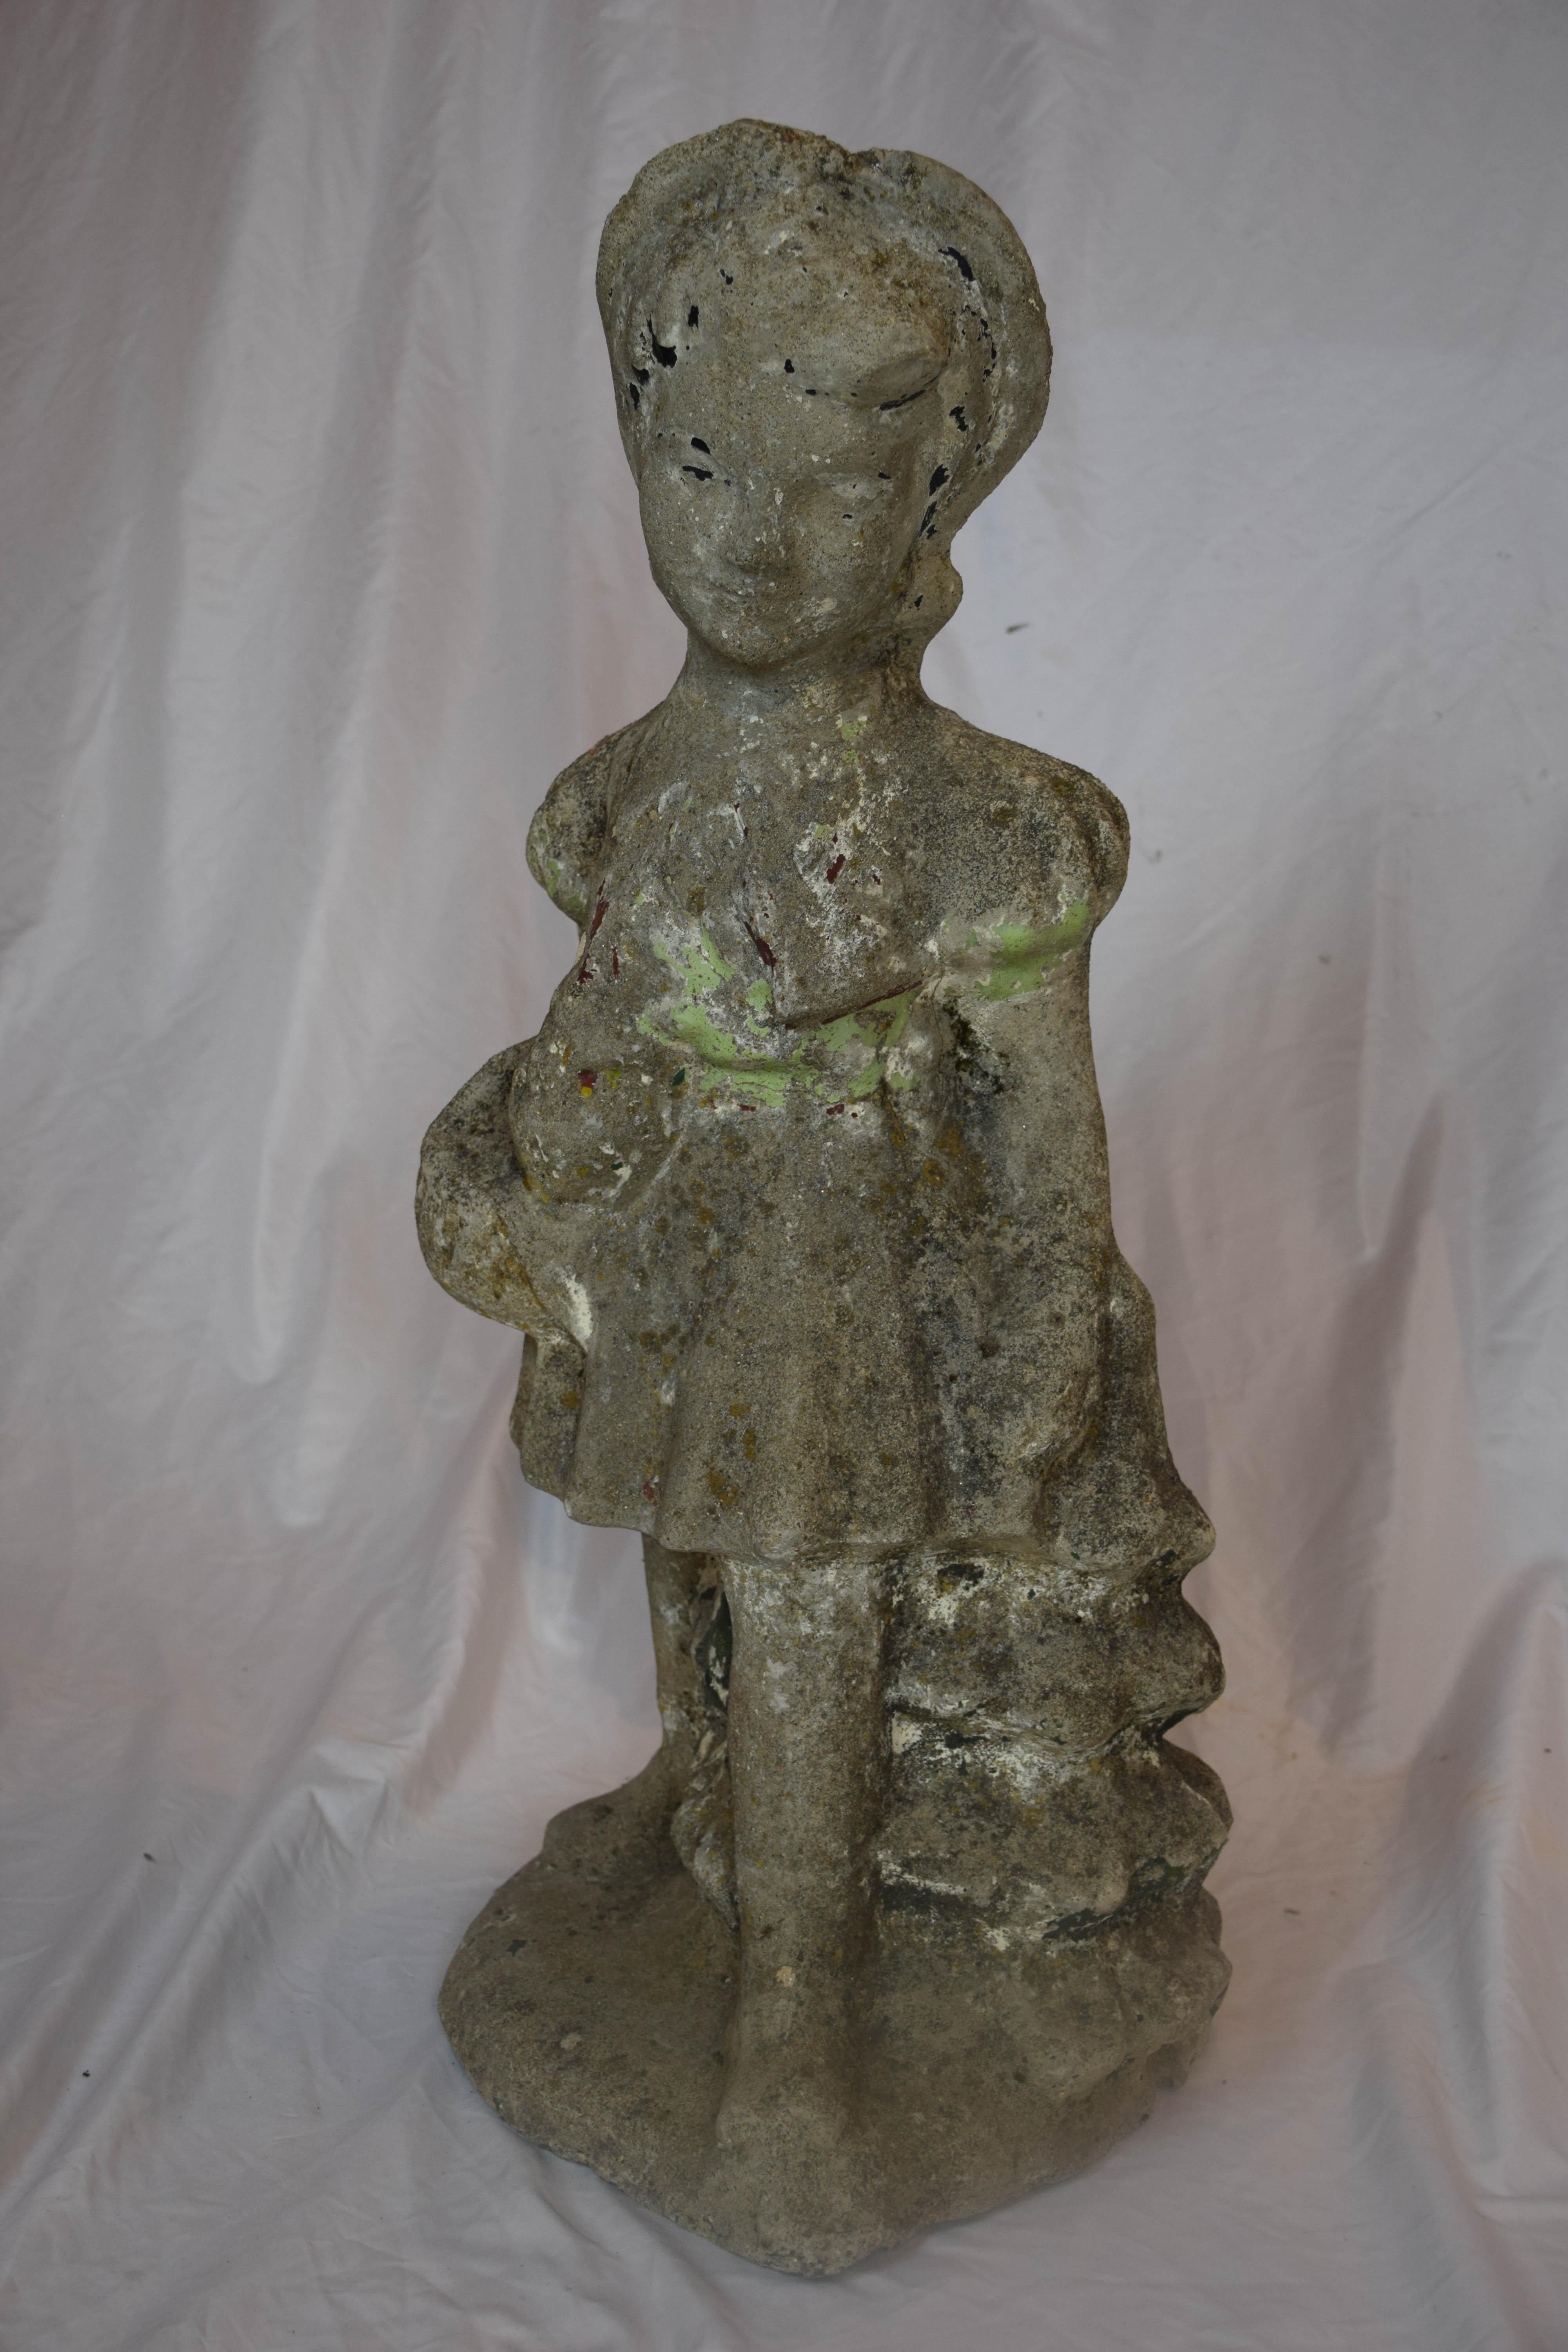 This vintage girl garden statue has a shabby weathered patina. Still showing signs of old chippy paint. The girl is carrying a basket in her left hand. The years have softened her edges. Perfect for any English, French country, Farmhouse or lake